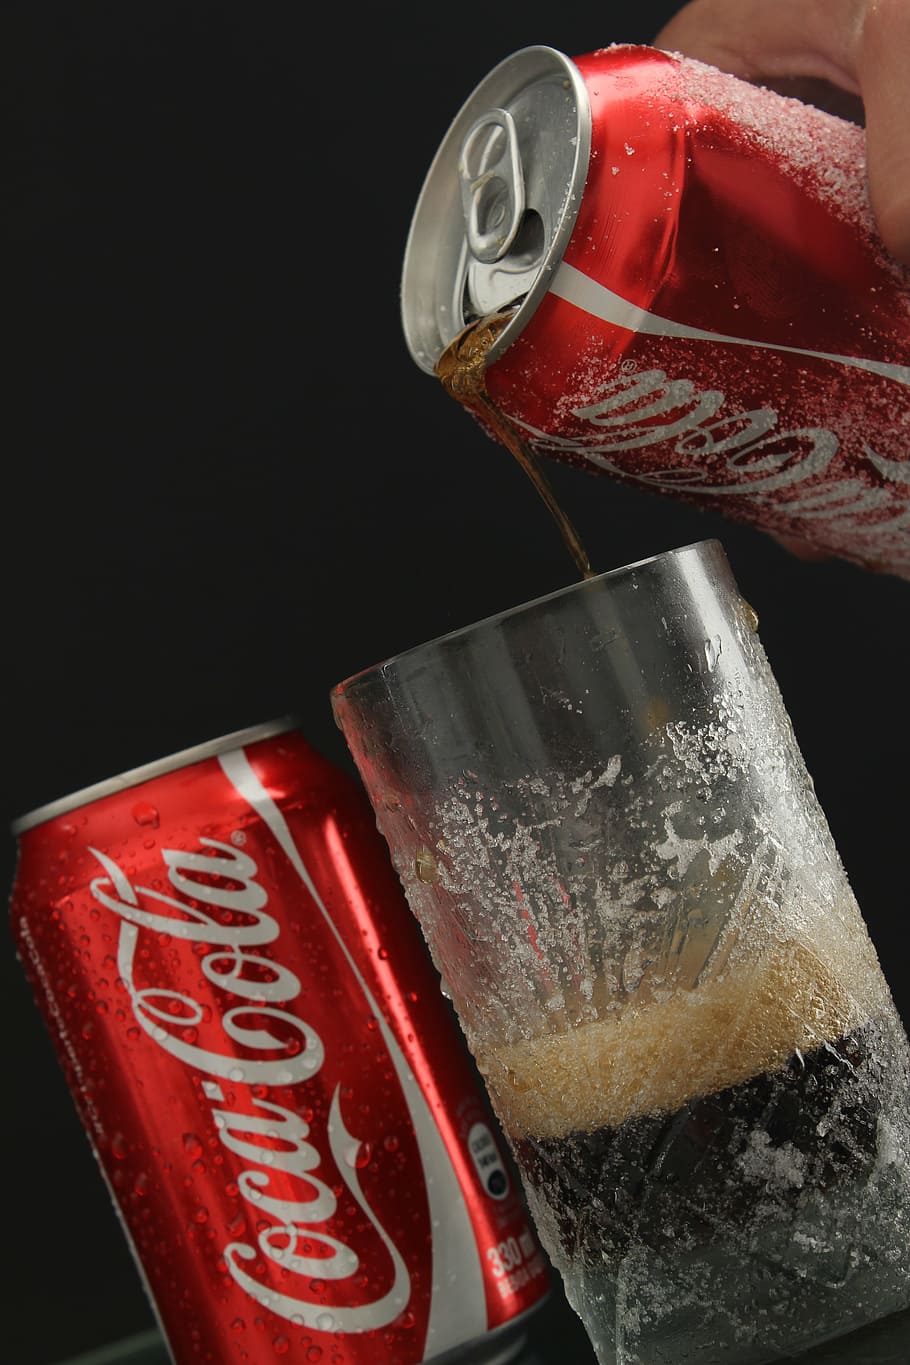 person, pouring, coca-cola soda, highball glass, drink, coca cola, can, red, food and drink, black background